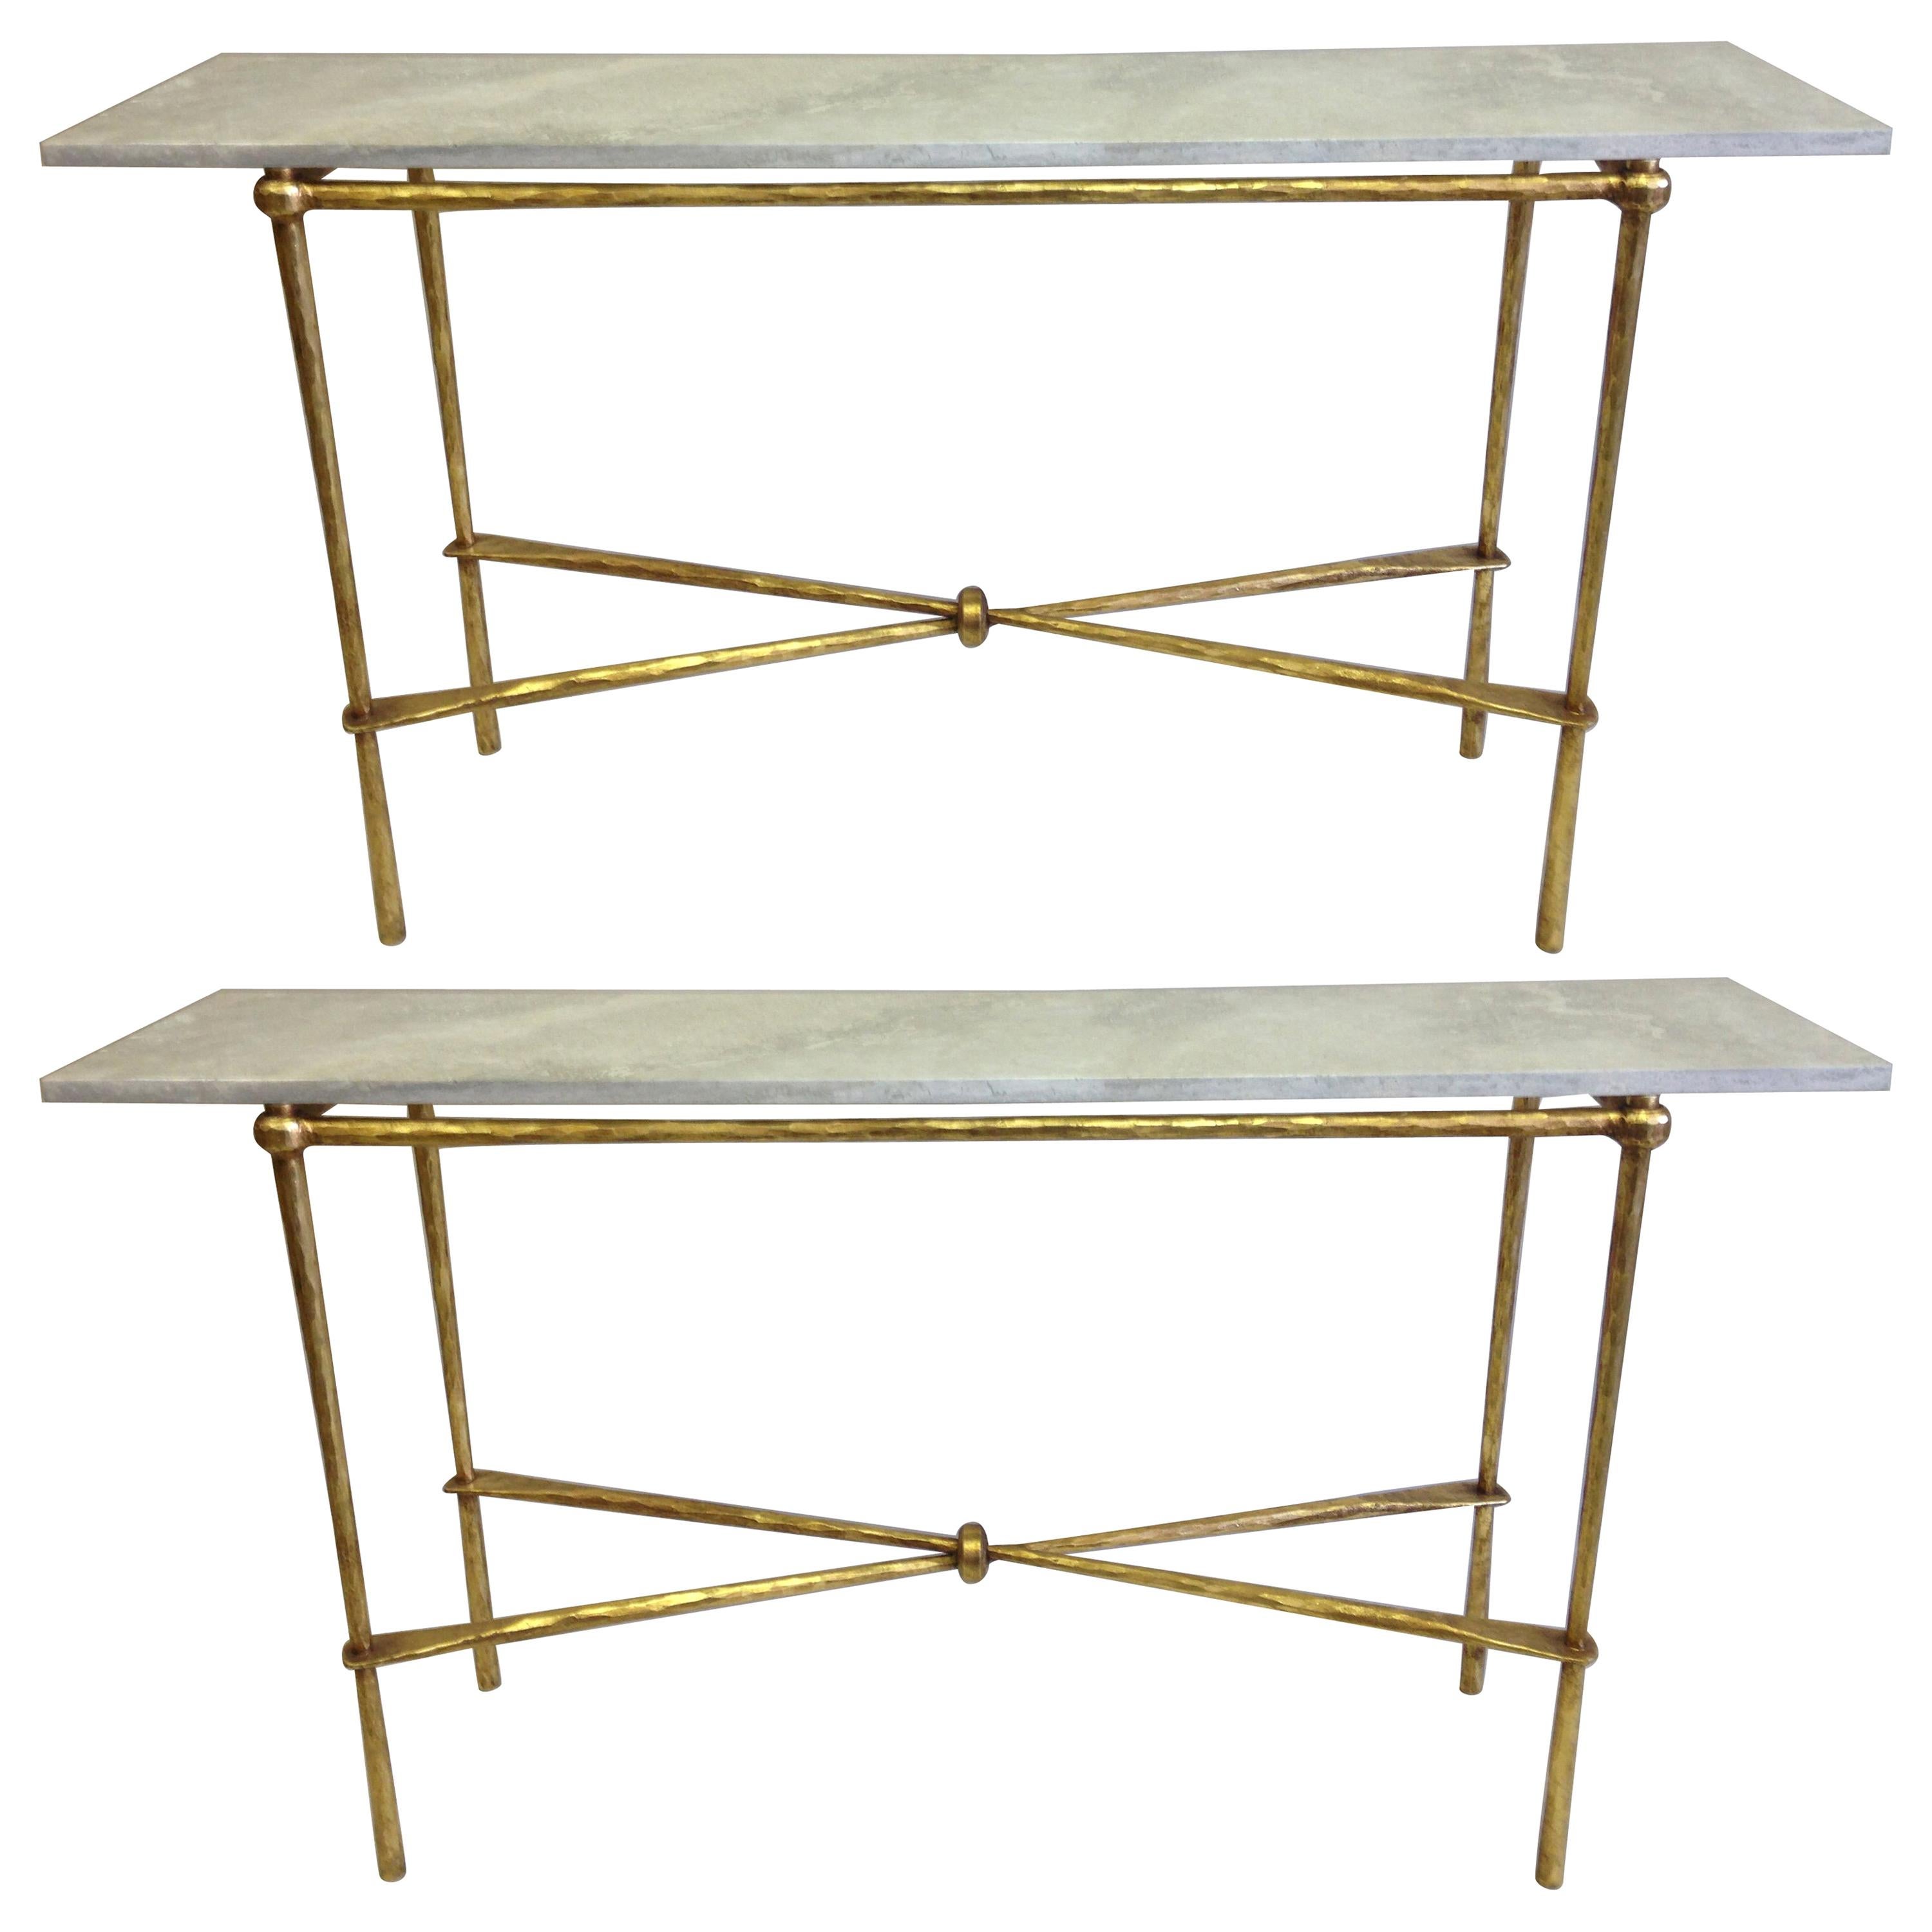 2 Italian Modern Neoclassical Gilt Iron Consoles by Giovanni Banci for Hermes